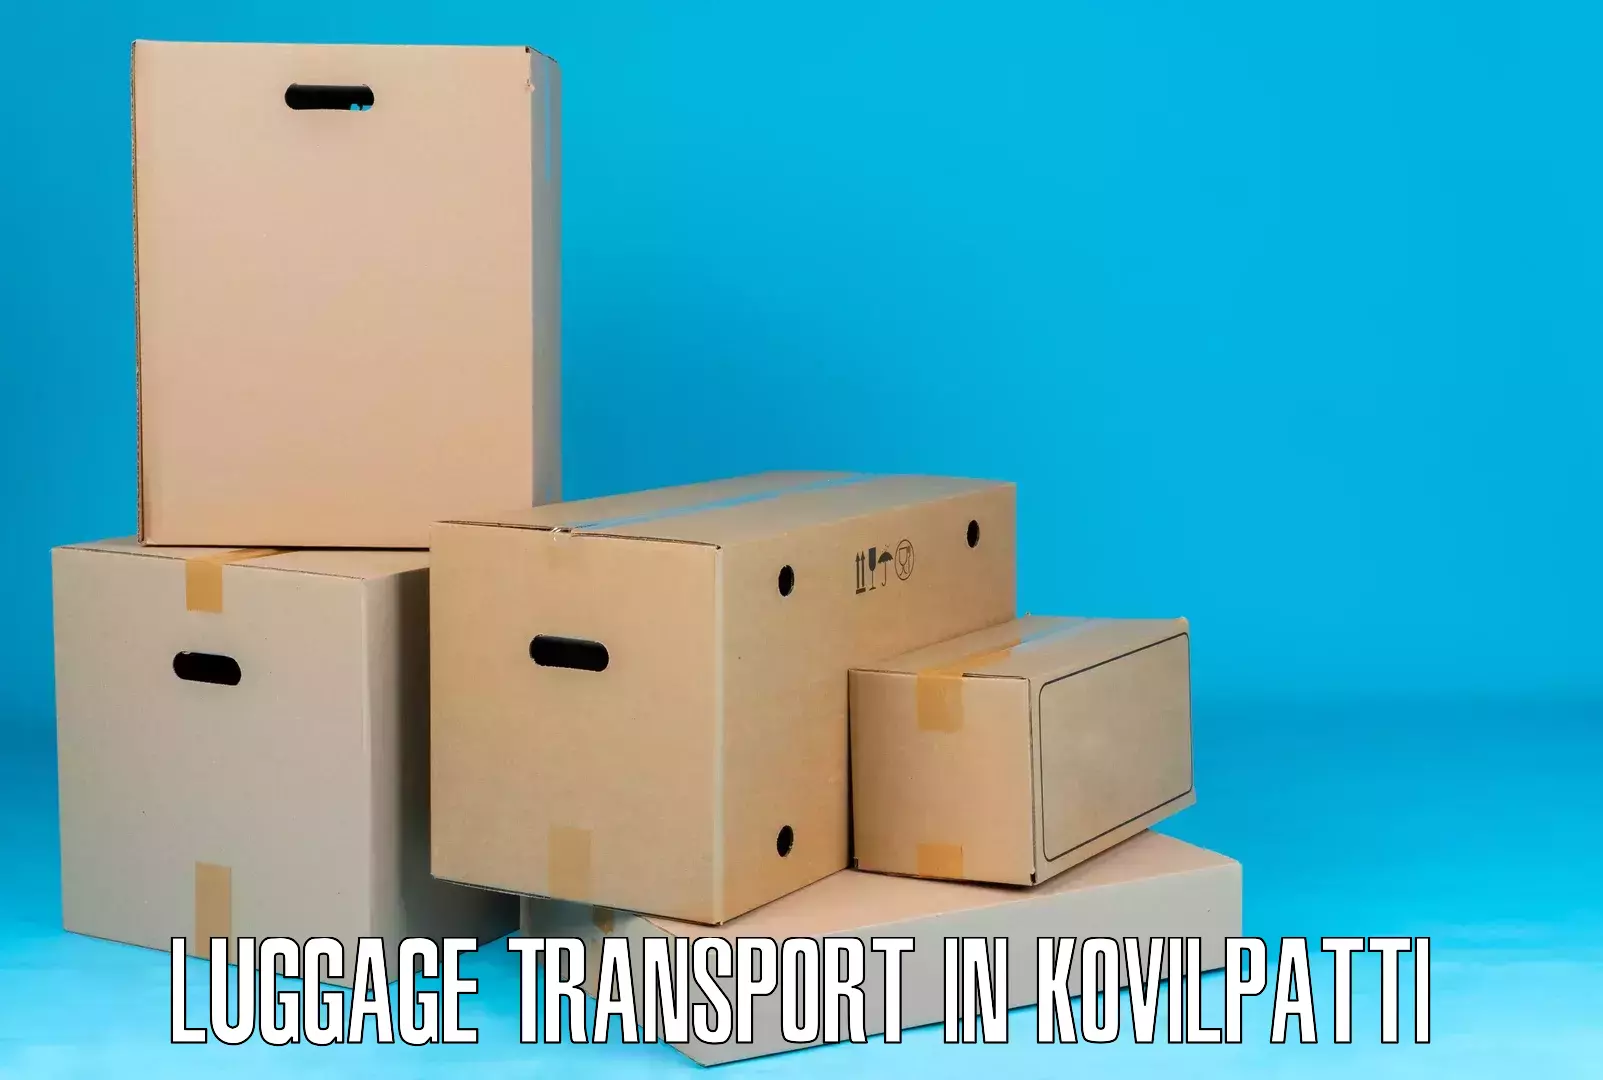 Automated luggage transport in Kovilpatti